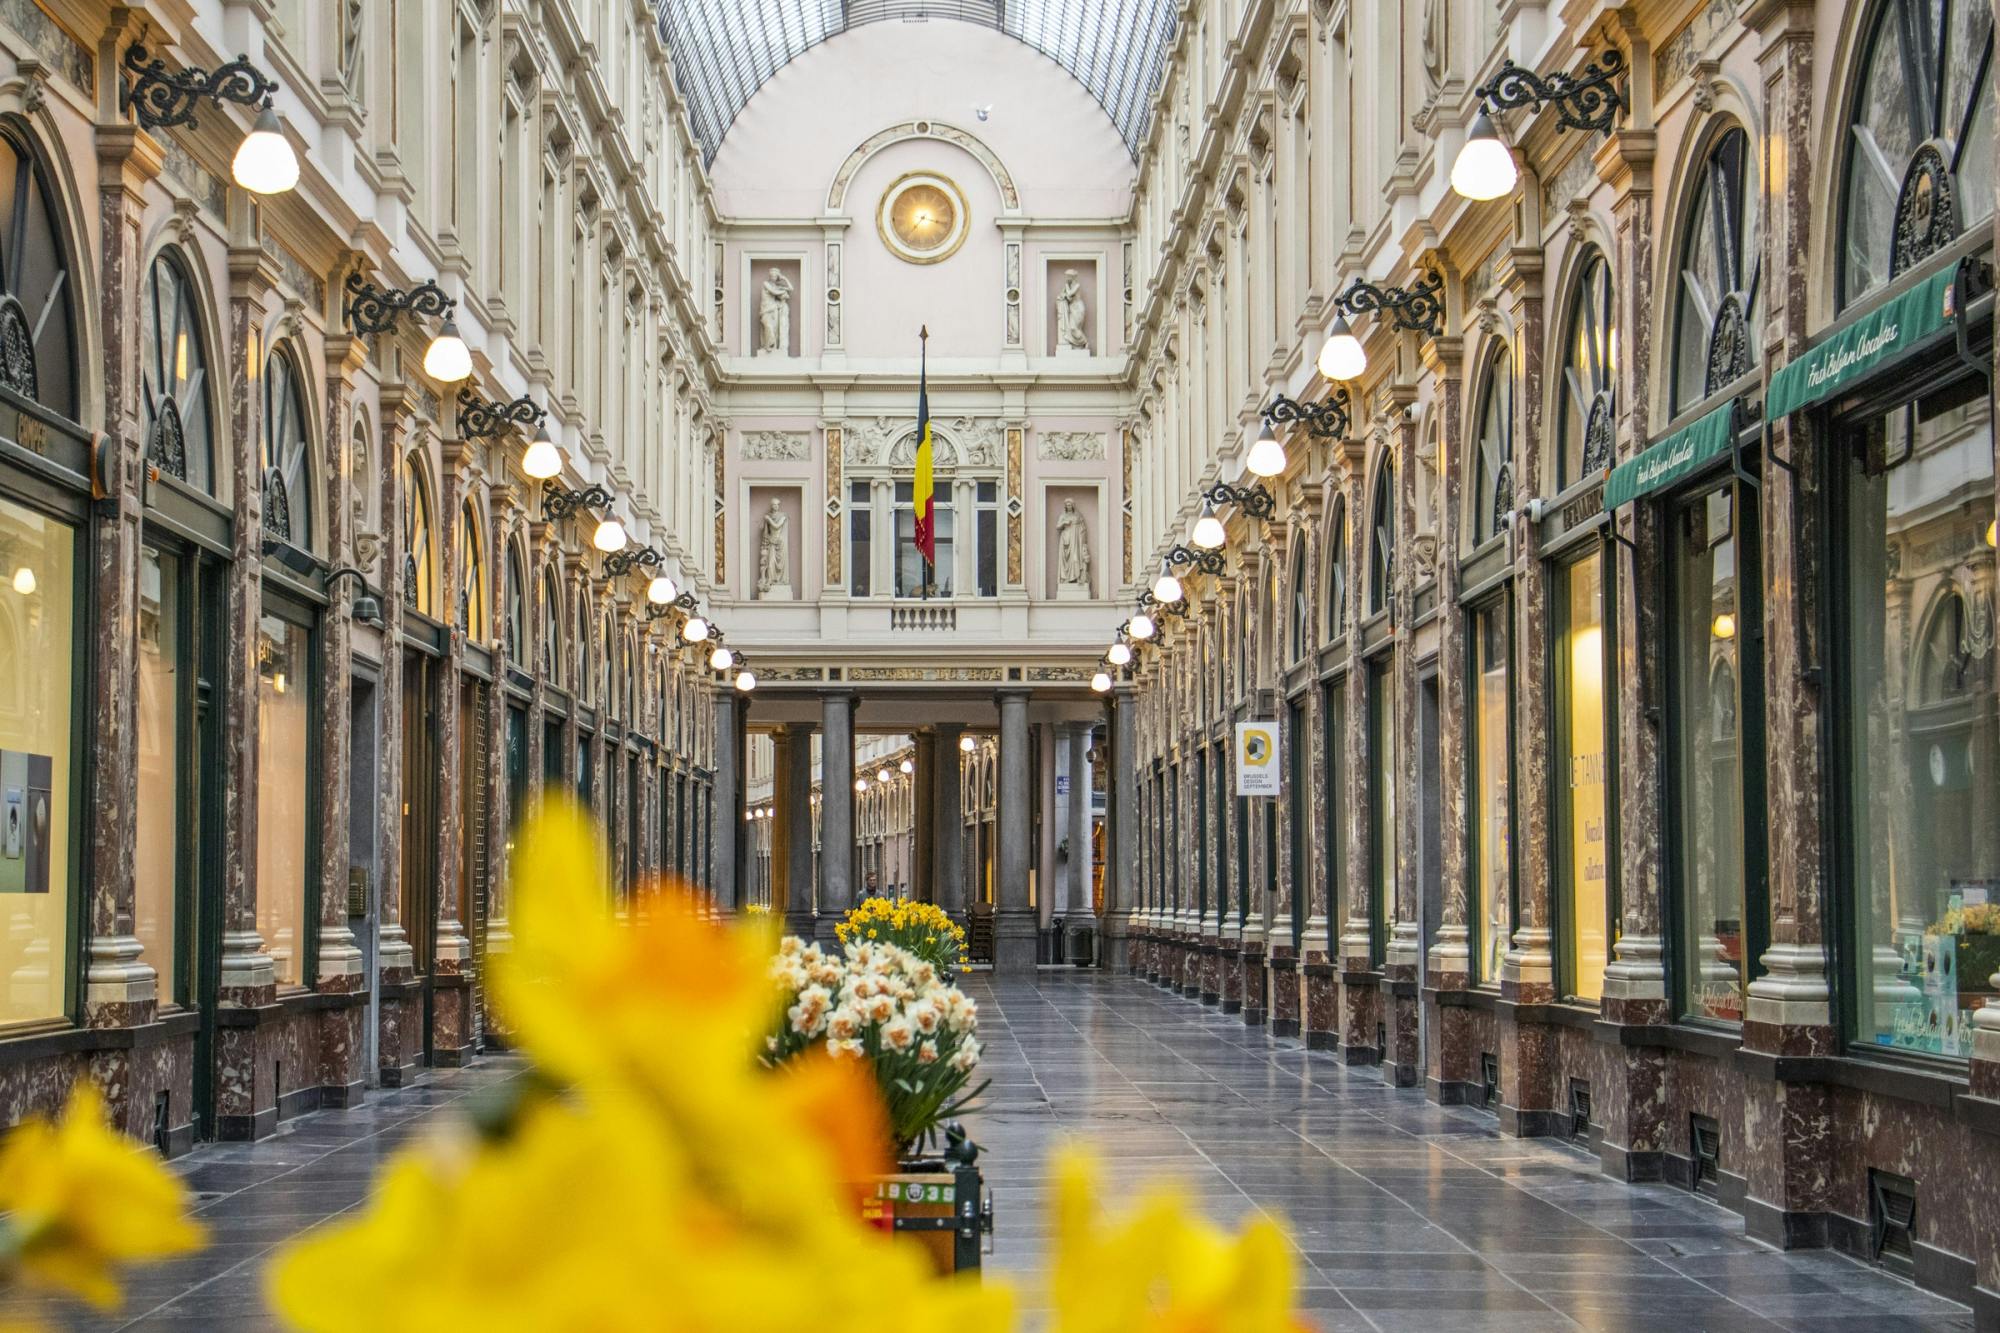 Explore Brussels in 1 hour with a Local